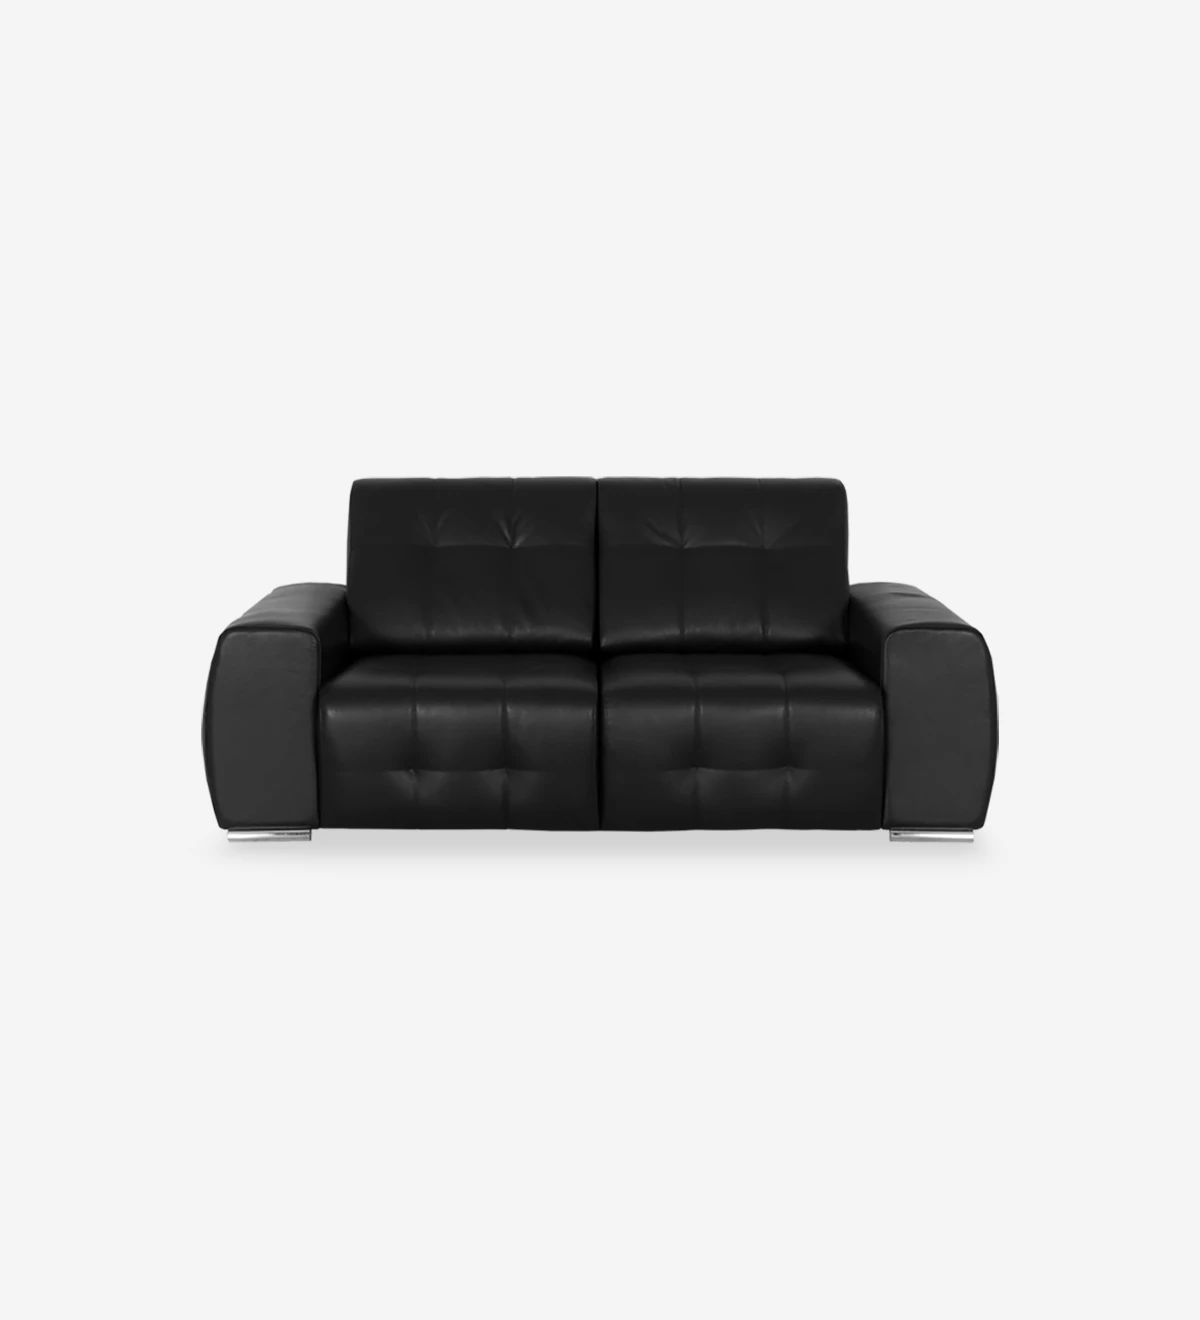 2 Seater, upholstered in black eco-leather with chrome feet.